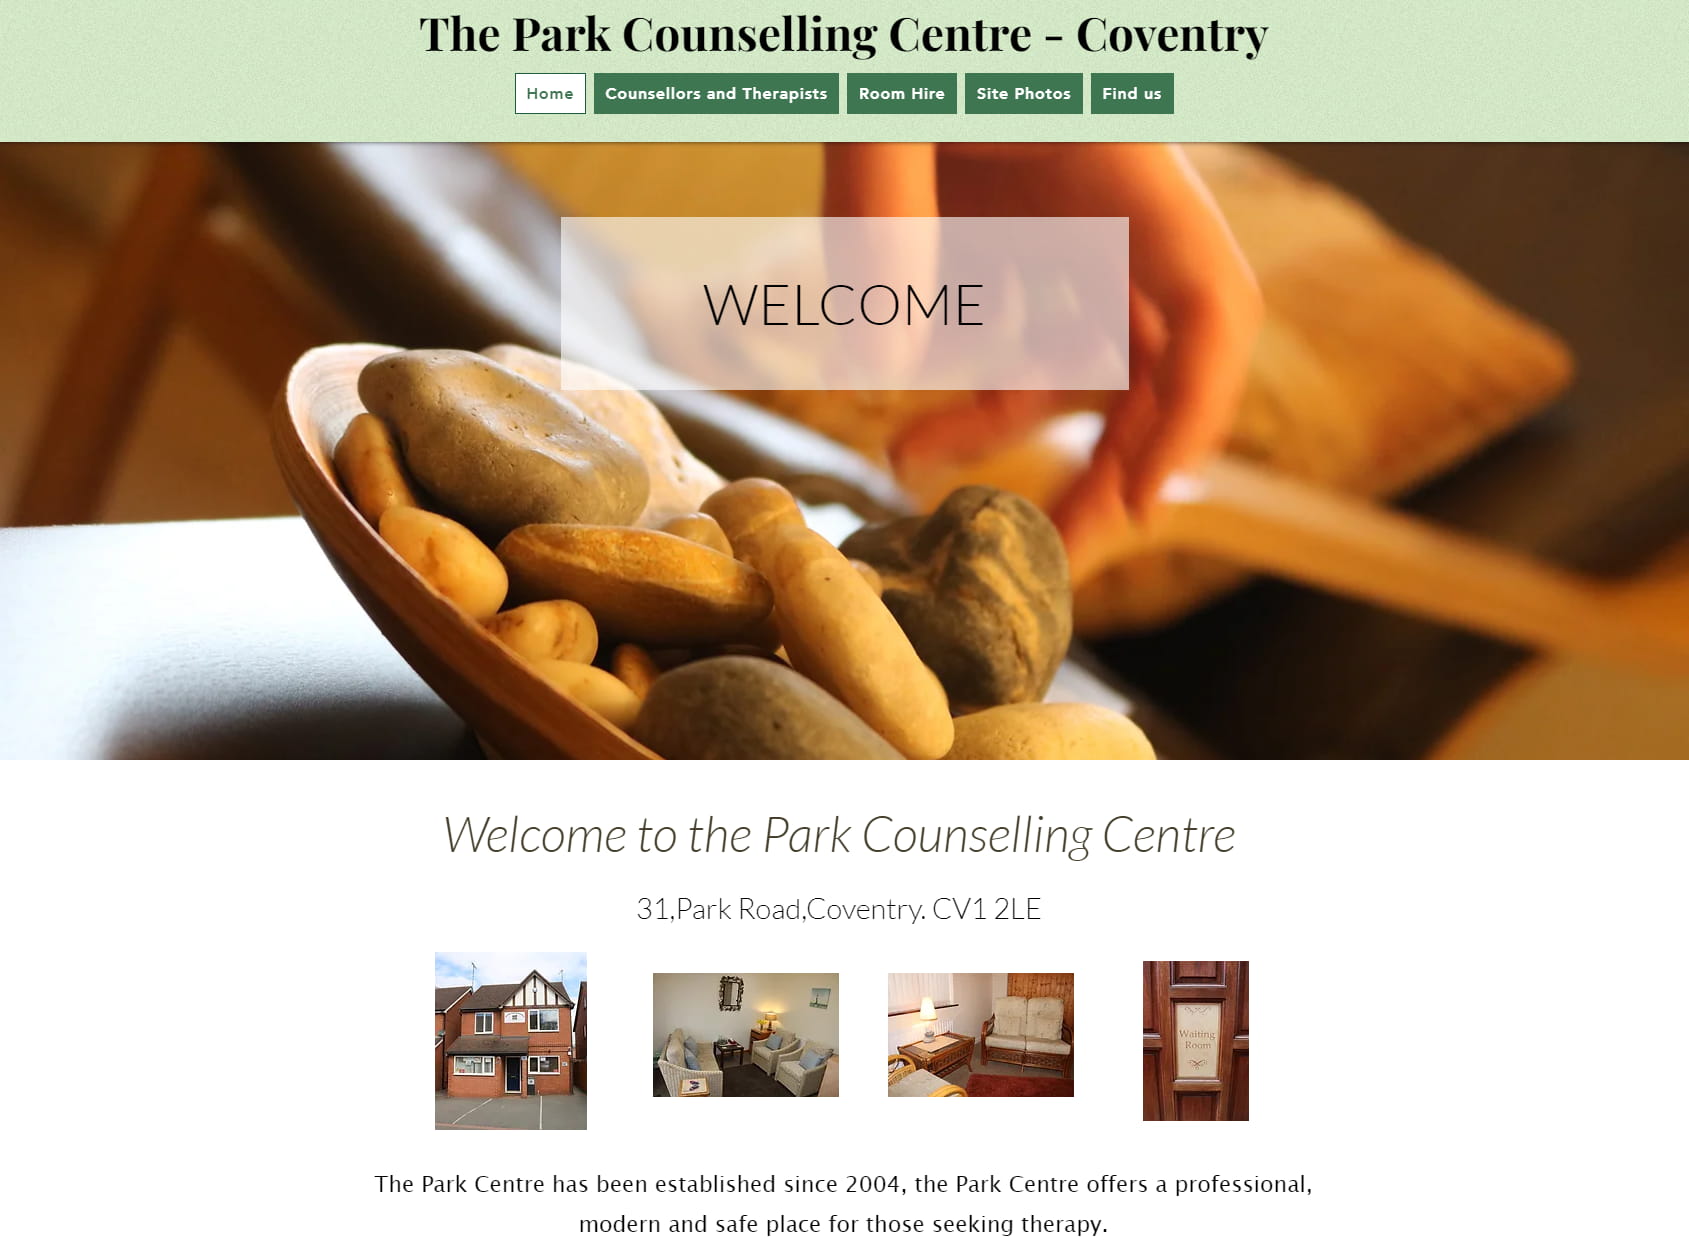 The Park Counselling Centre